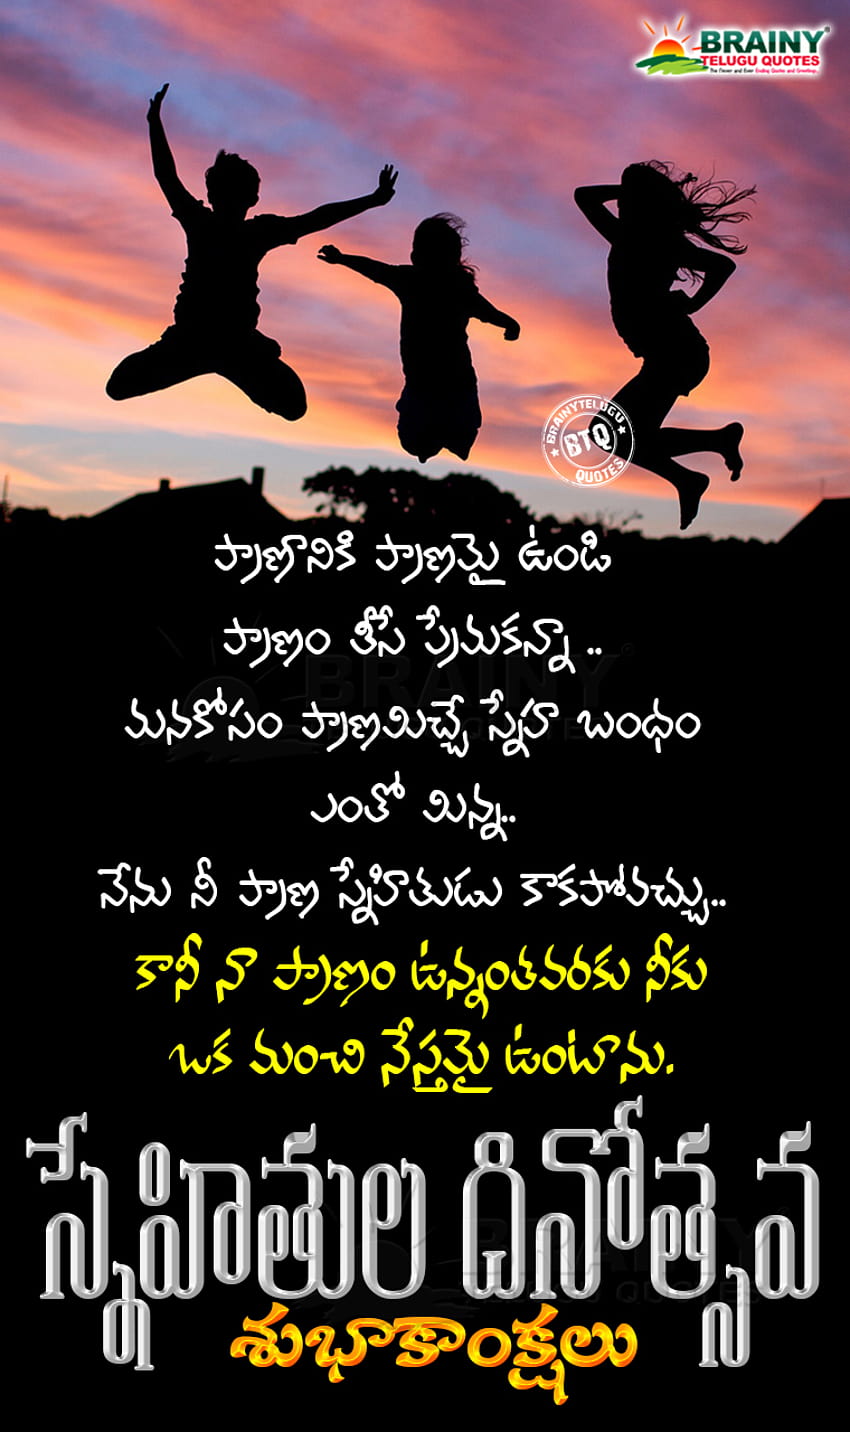 Telugu Friendship Day Quotes greetings wishes for whatsapp Dp ...